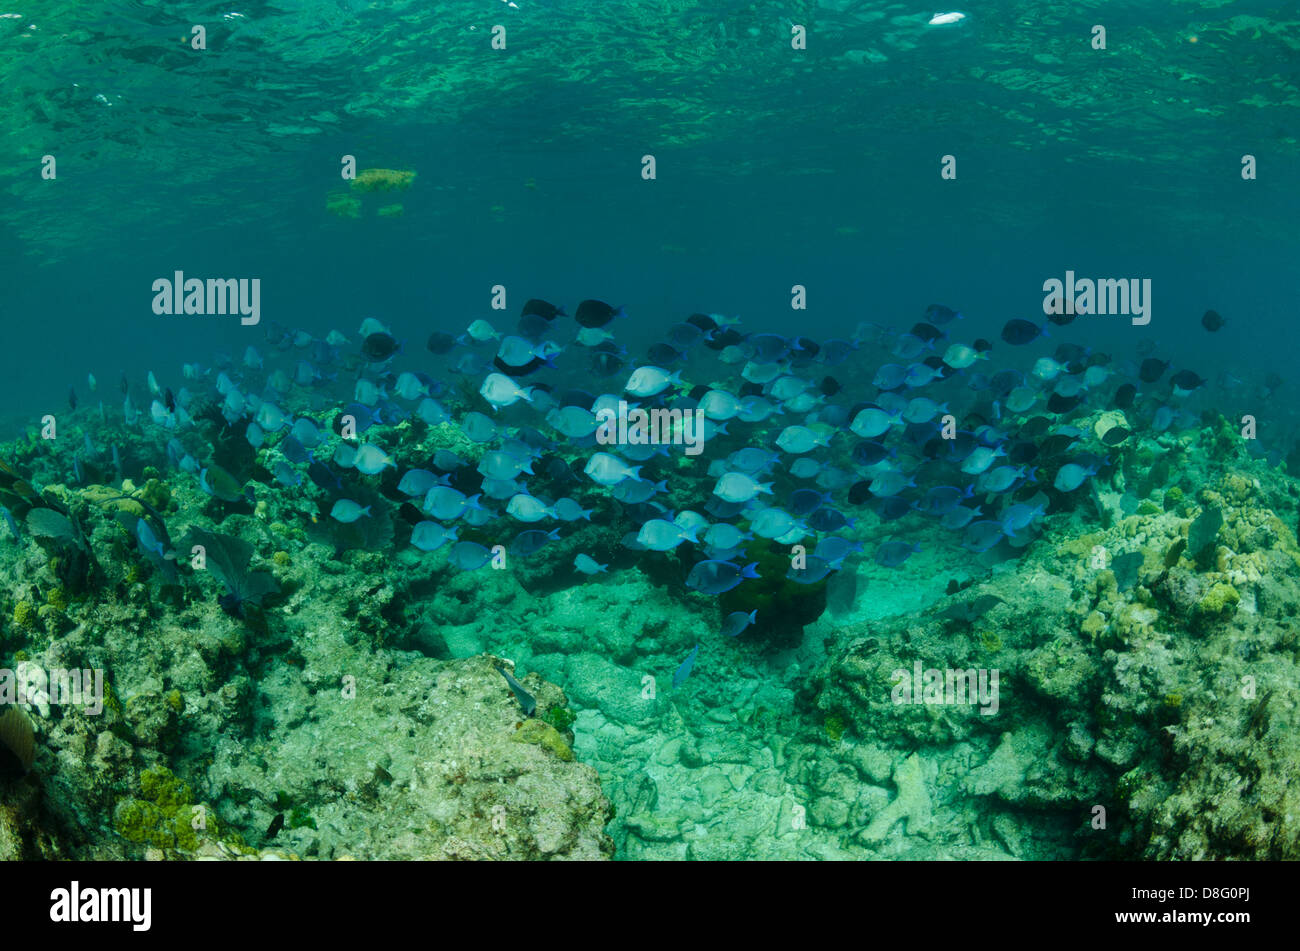 A school of blue tang fish in the shallow waters near Key Largo, FL Stock Photo